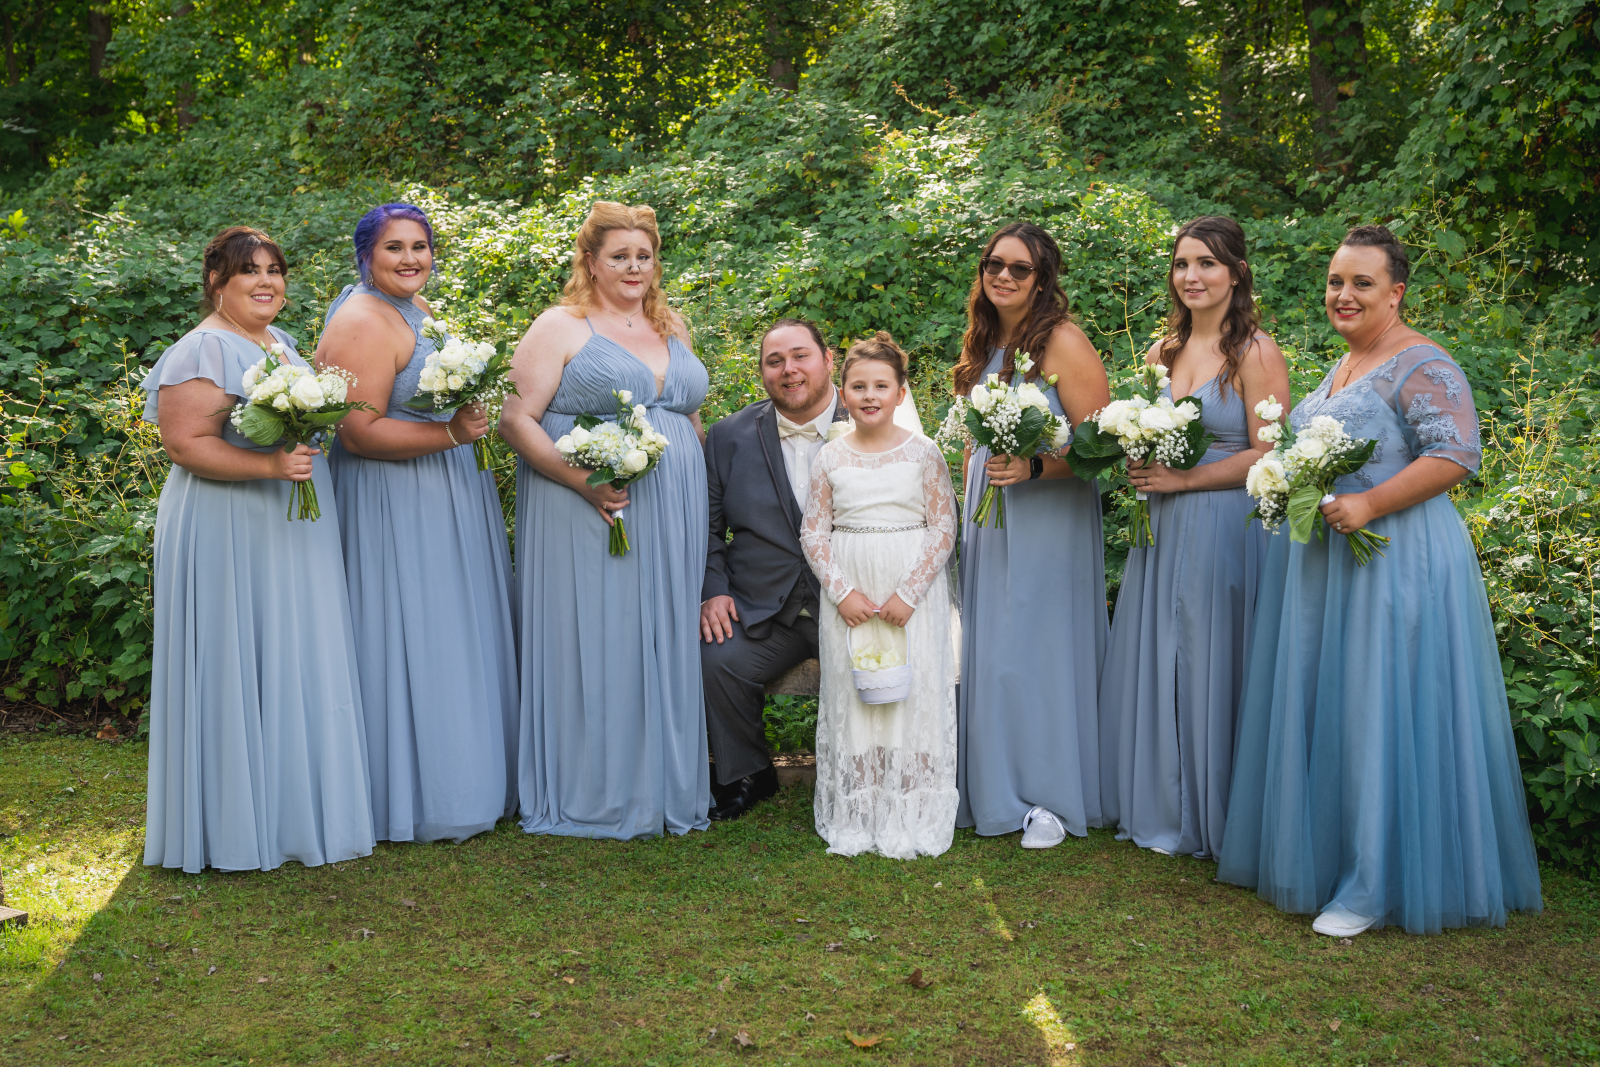 Groom with bridesmaids and flower girl, bridal party portrait, green, nature, trees, outdoor September wedding at Westfall Event Center